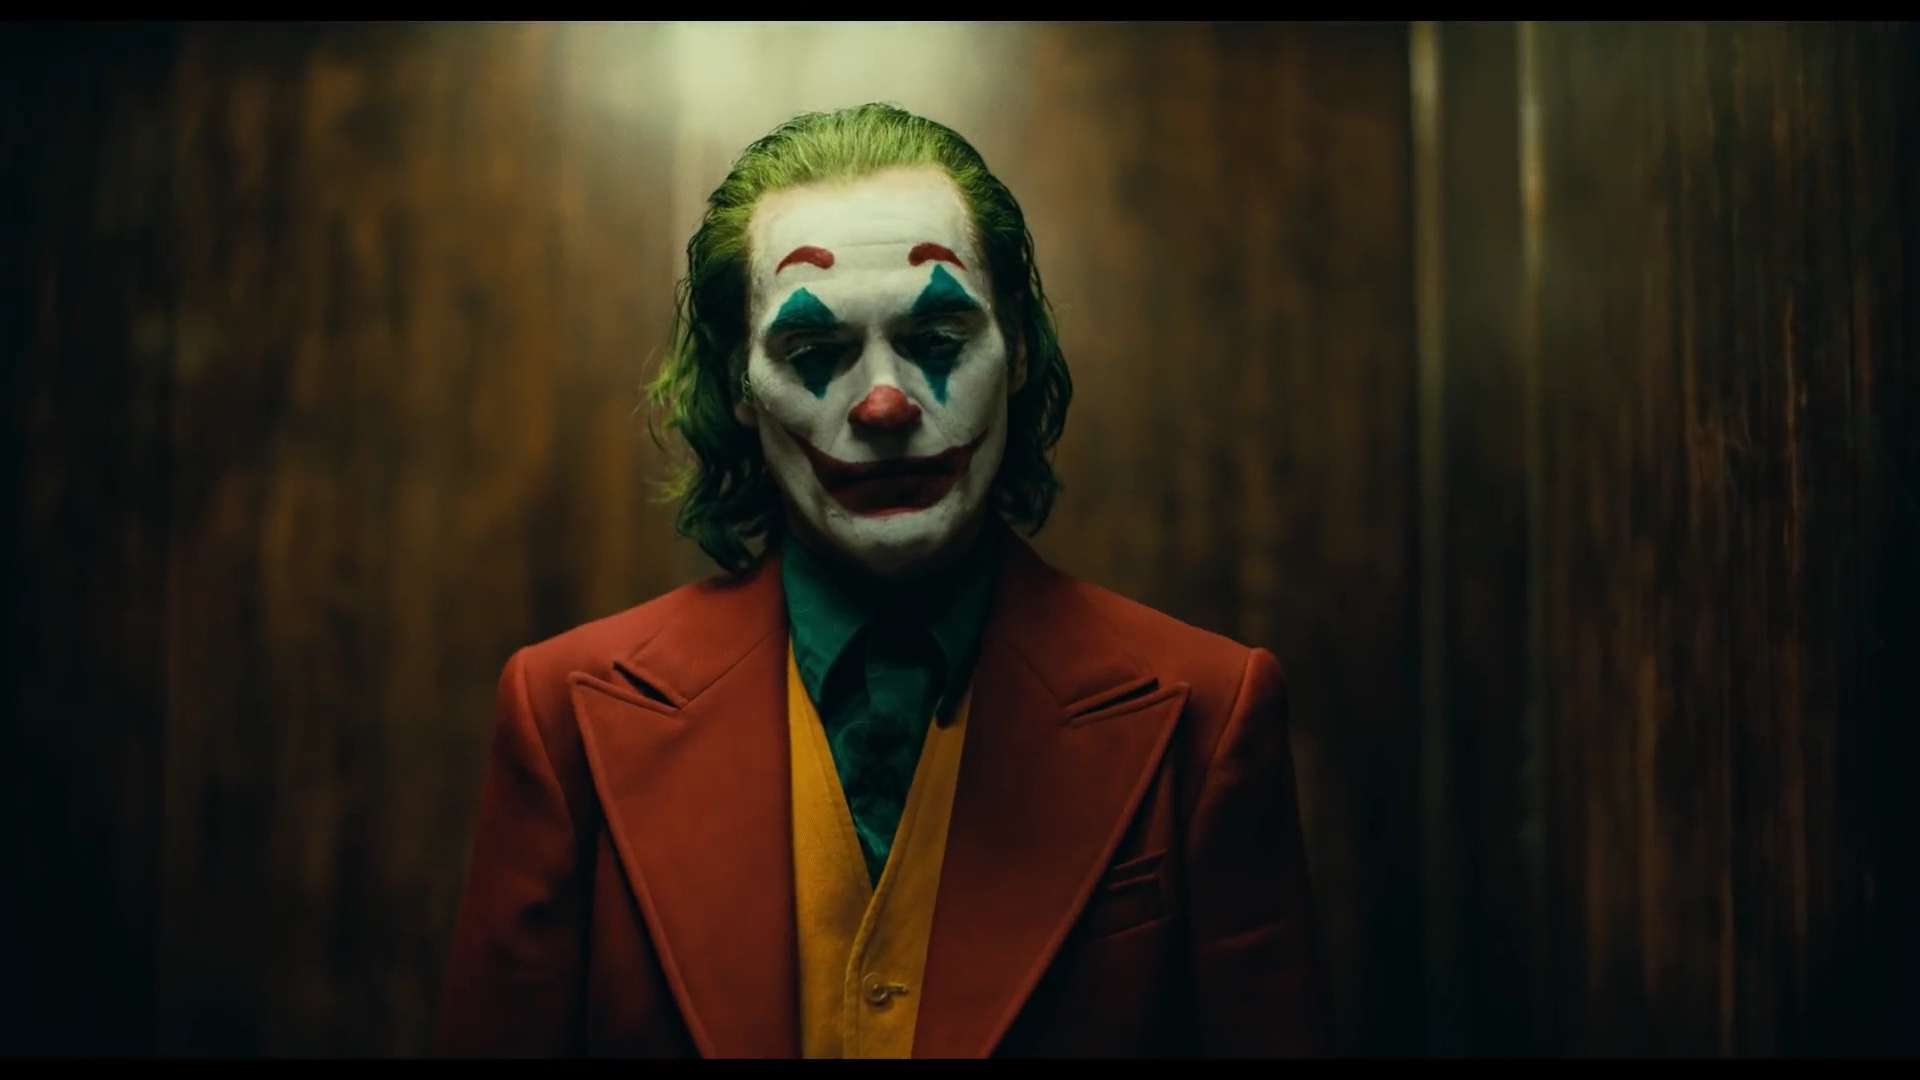 Joker: A Film Marred by Racial Ambiguity and Incoherent Messaging